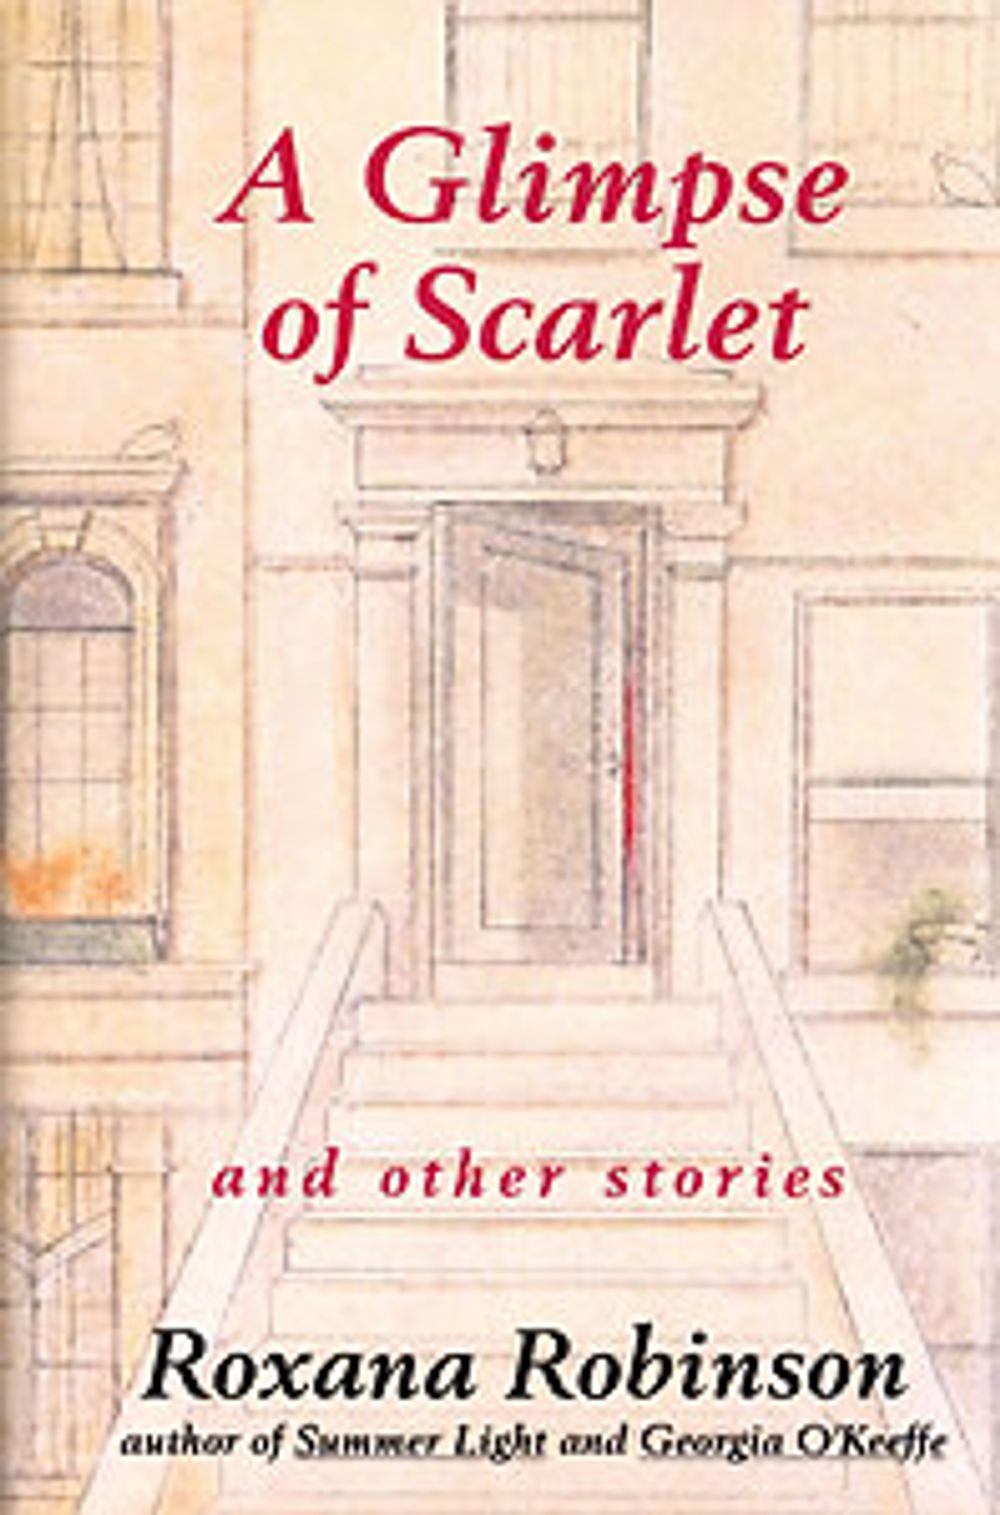 cover image of the book A Glimpse of Scarlet